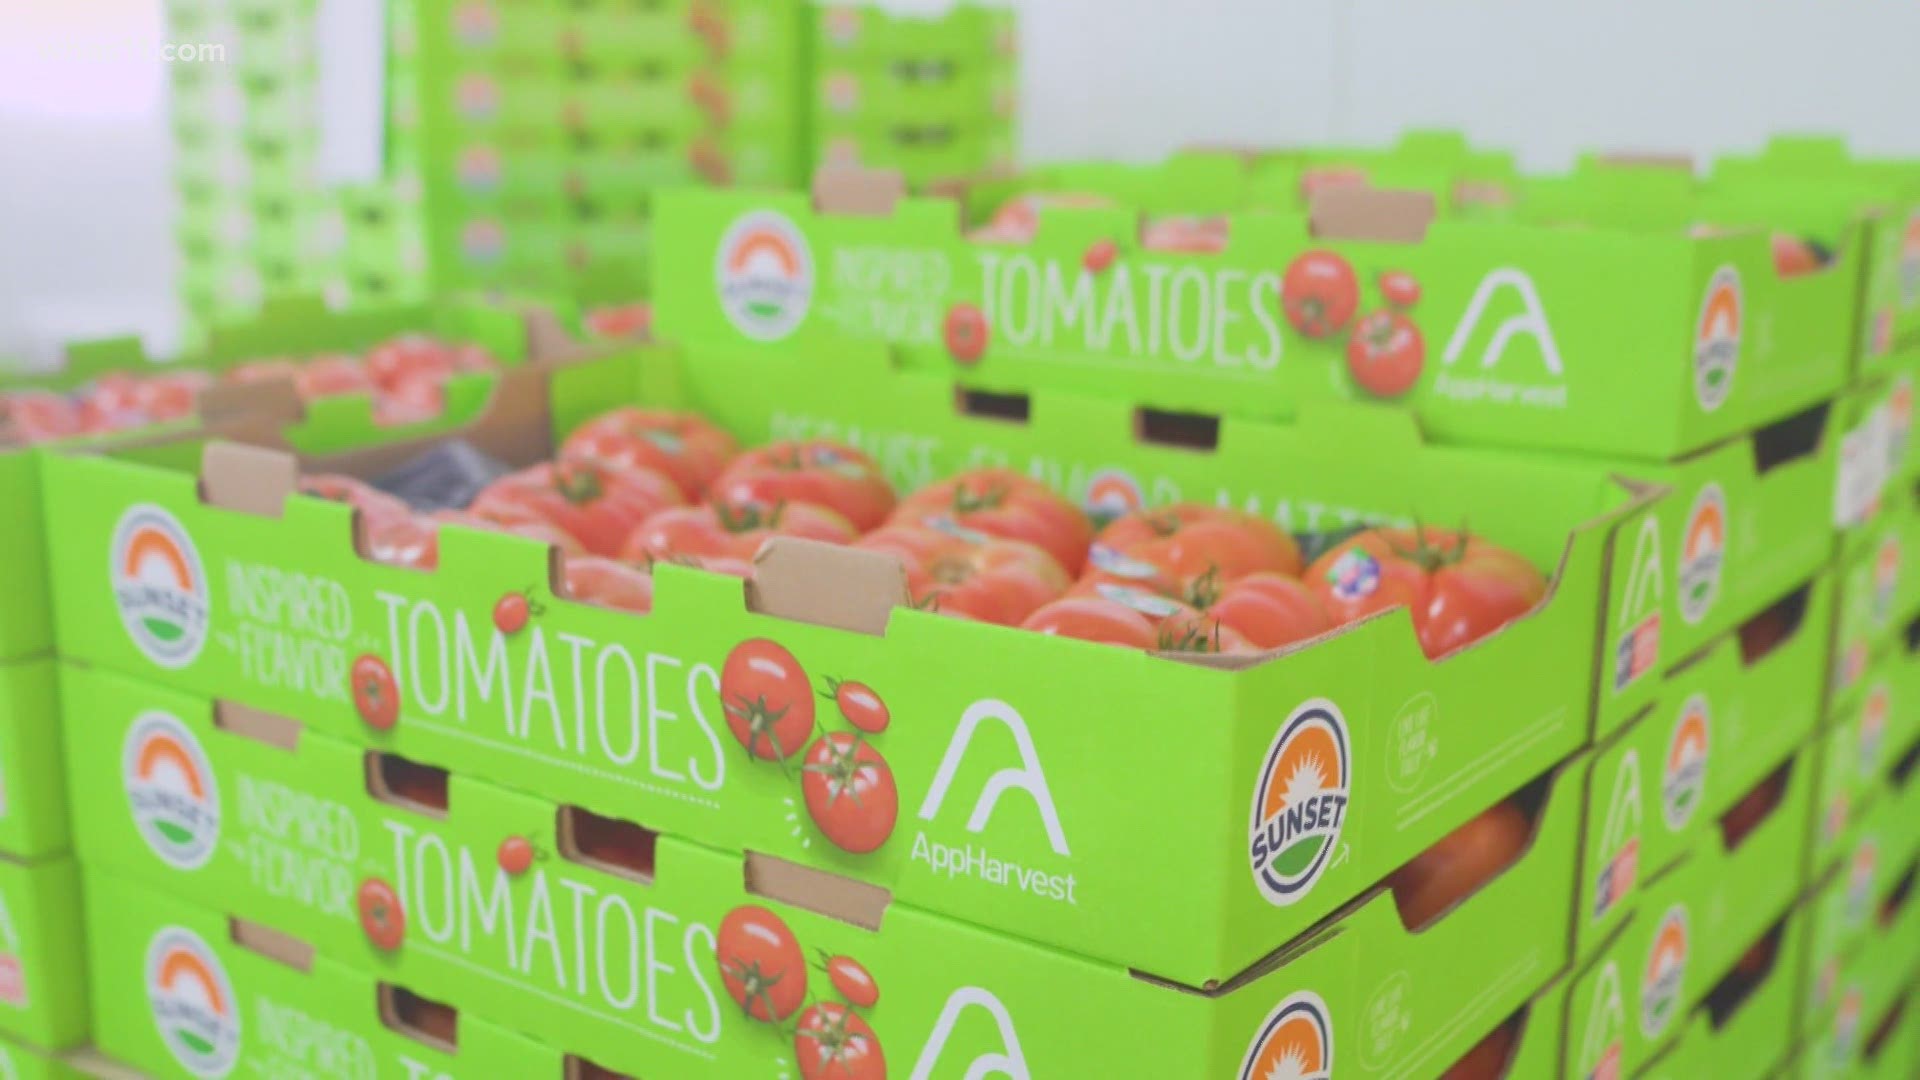 The ag-tech company build the world's largest greenhouse in Morehead, and is now sending out their first crops: tomatoes.